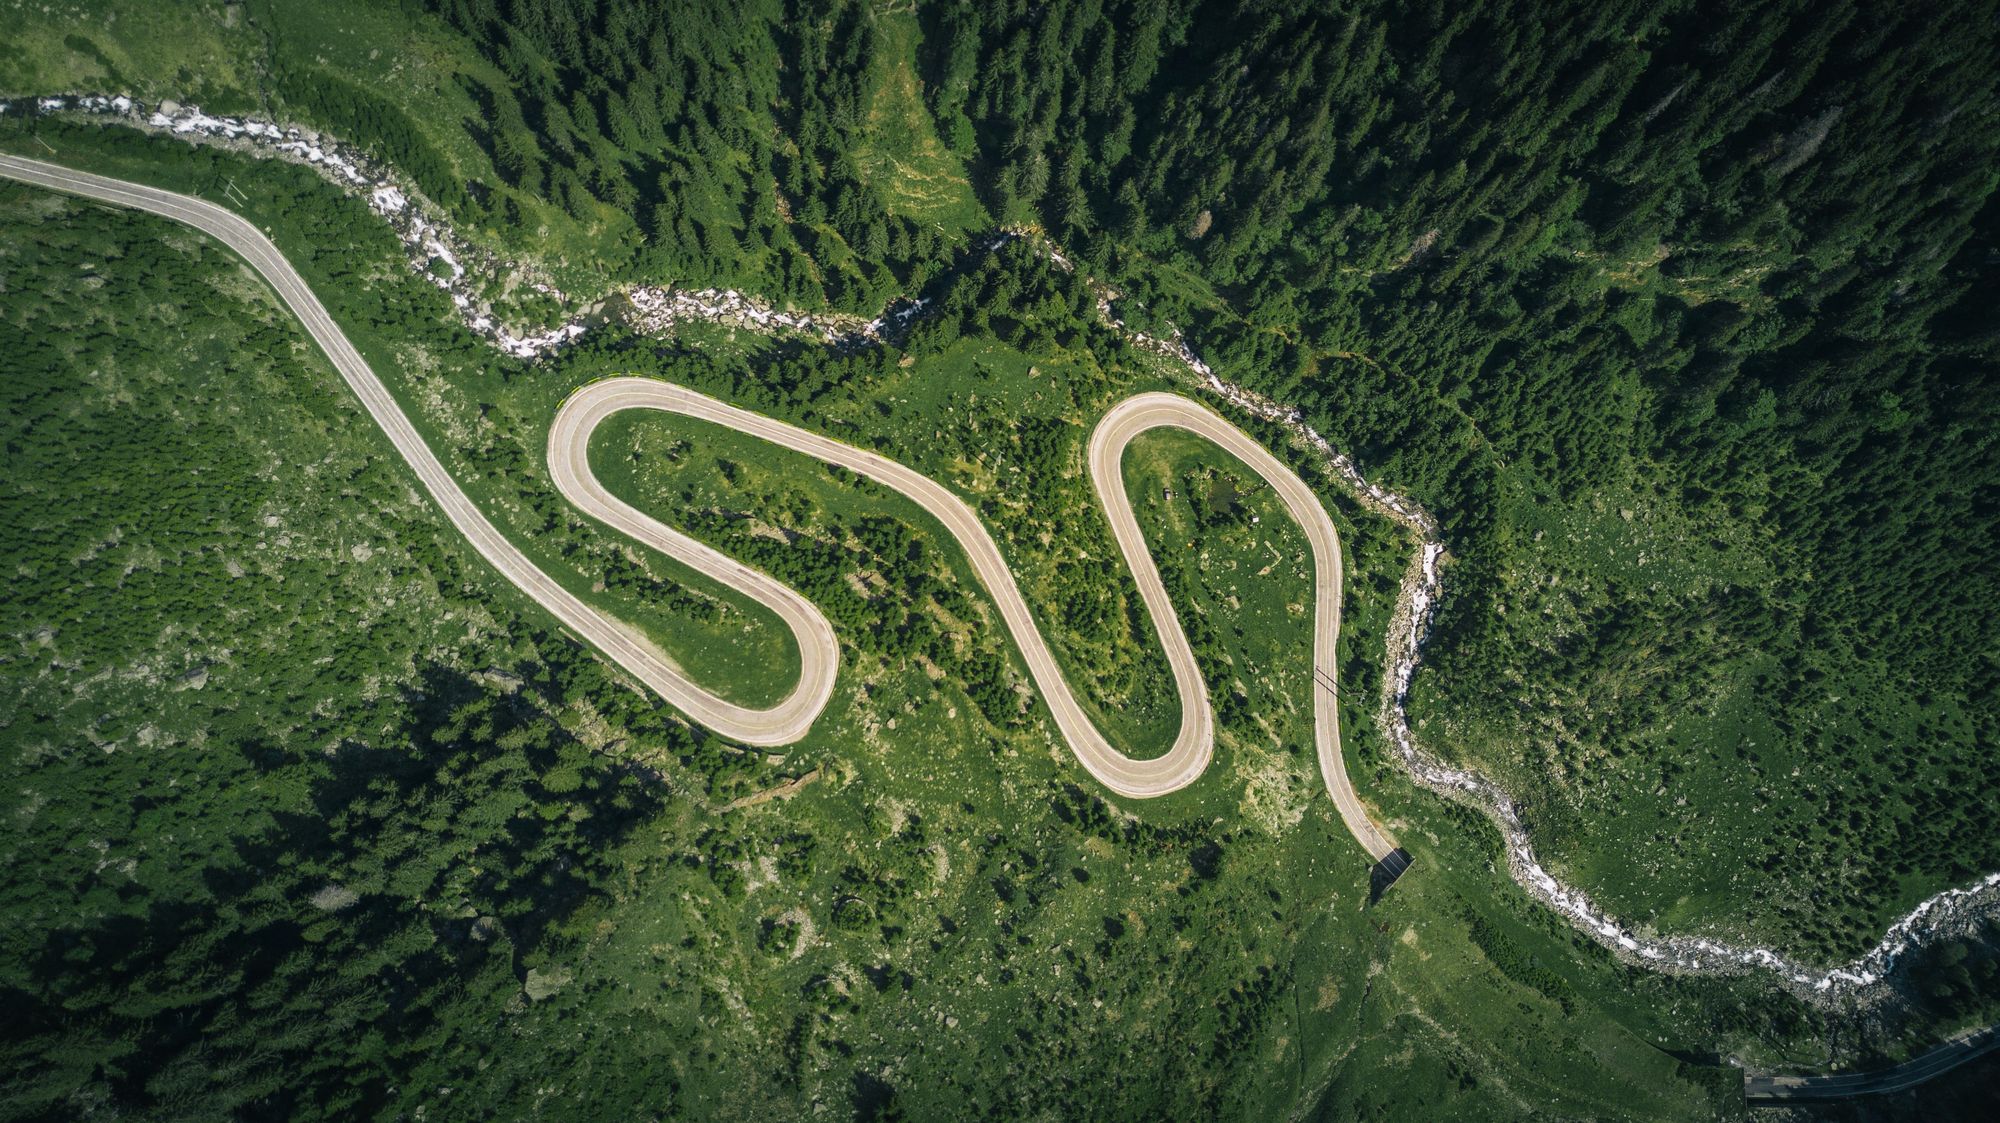 This twisted mountain road perfectly illustrates our Cloud to Cloud automation journey